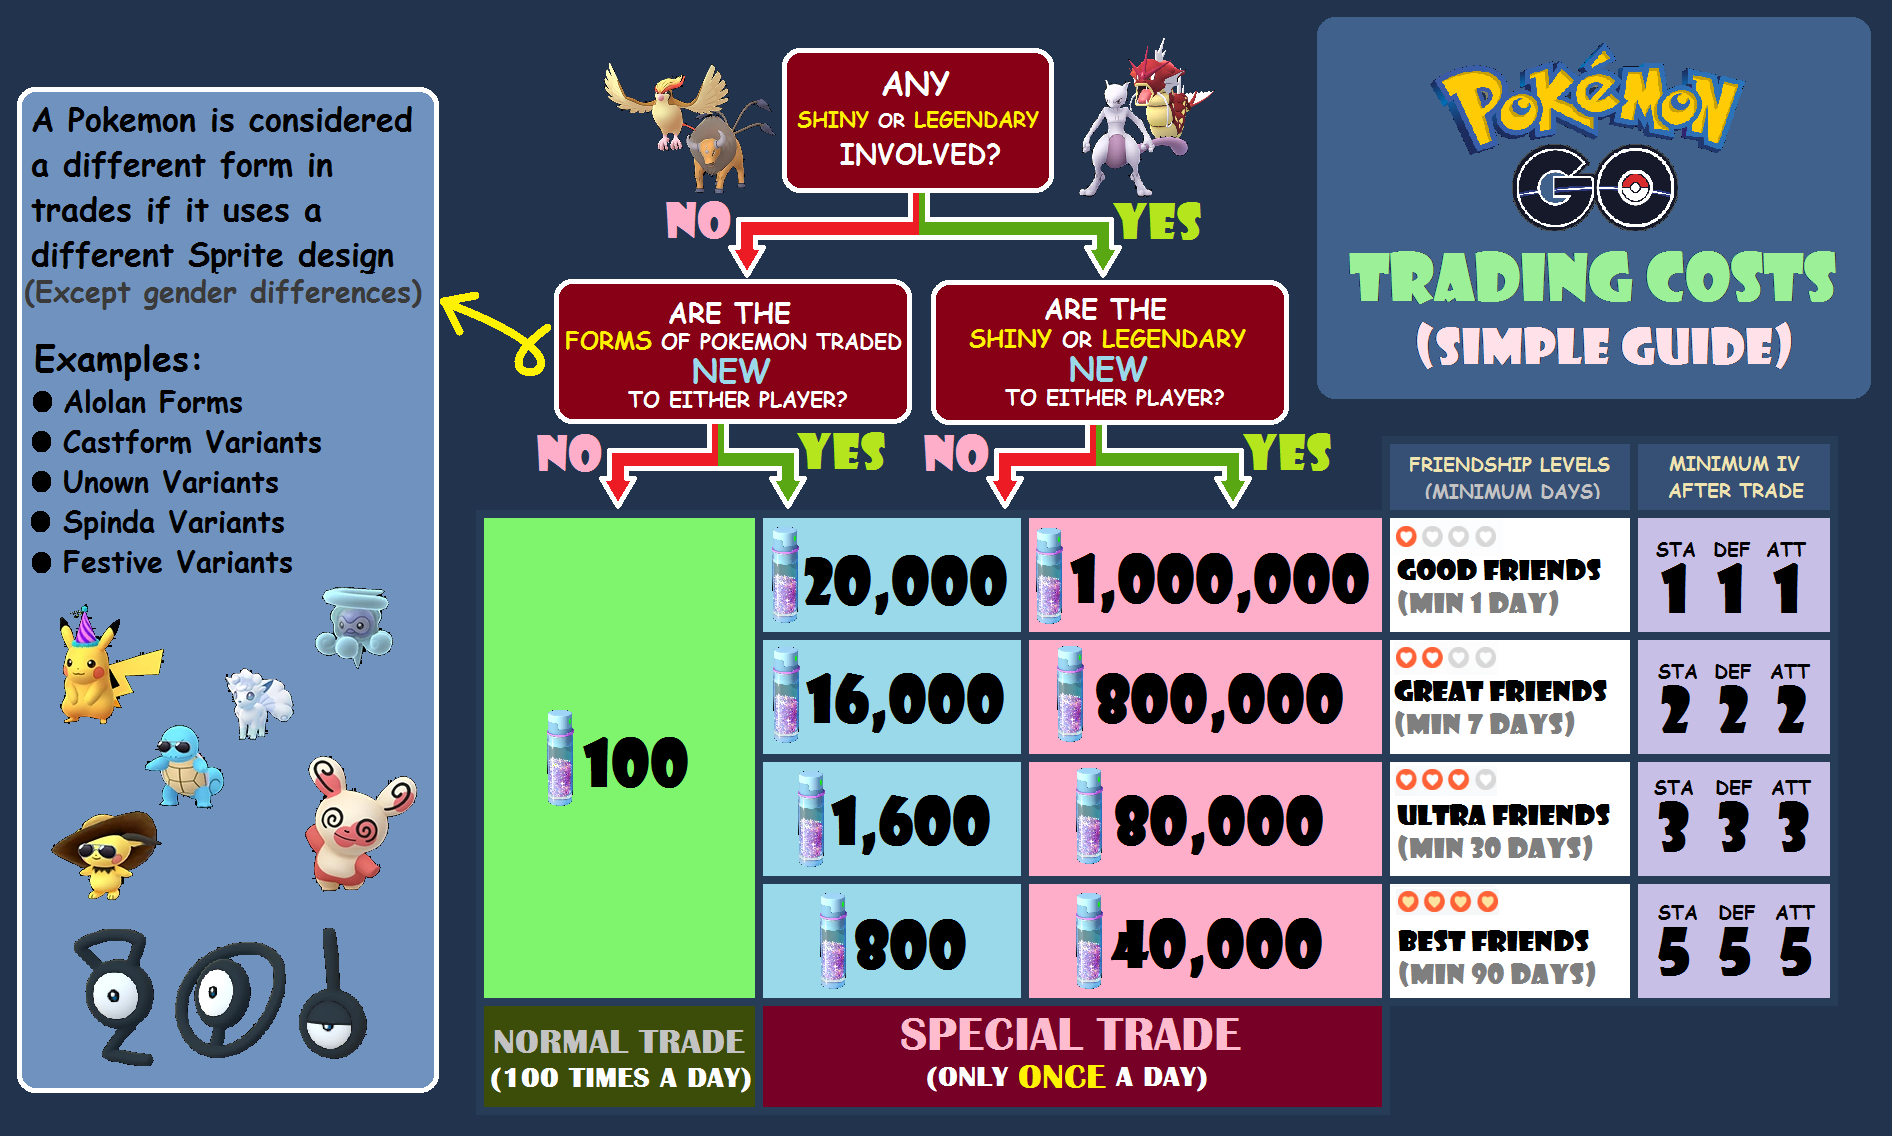 Pokémon Go Trading Costs Simple Guide